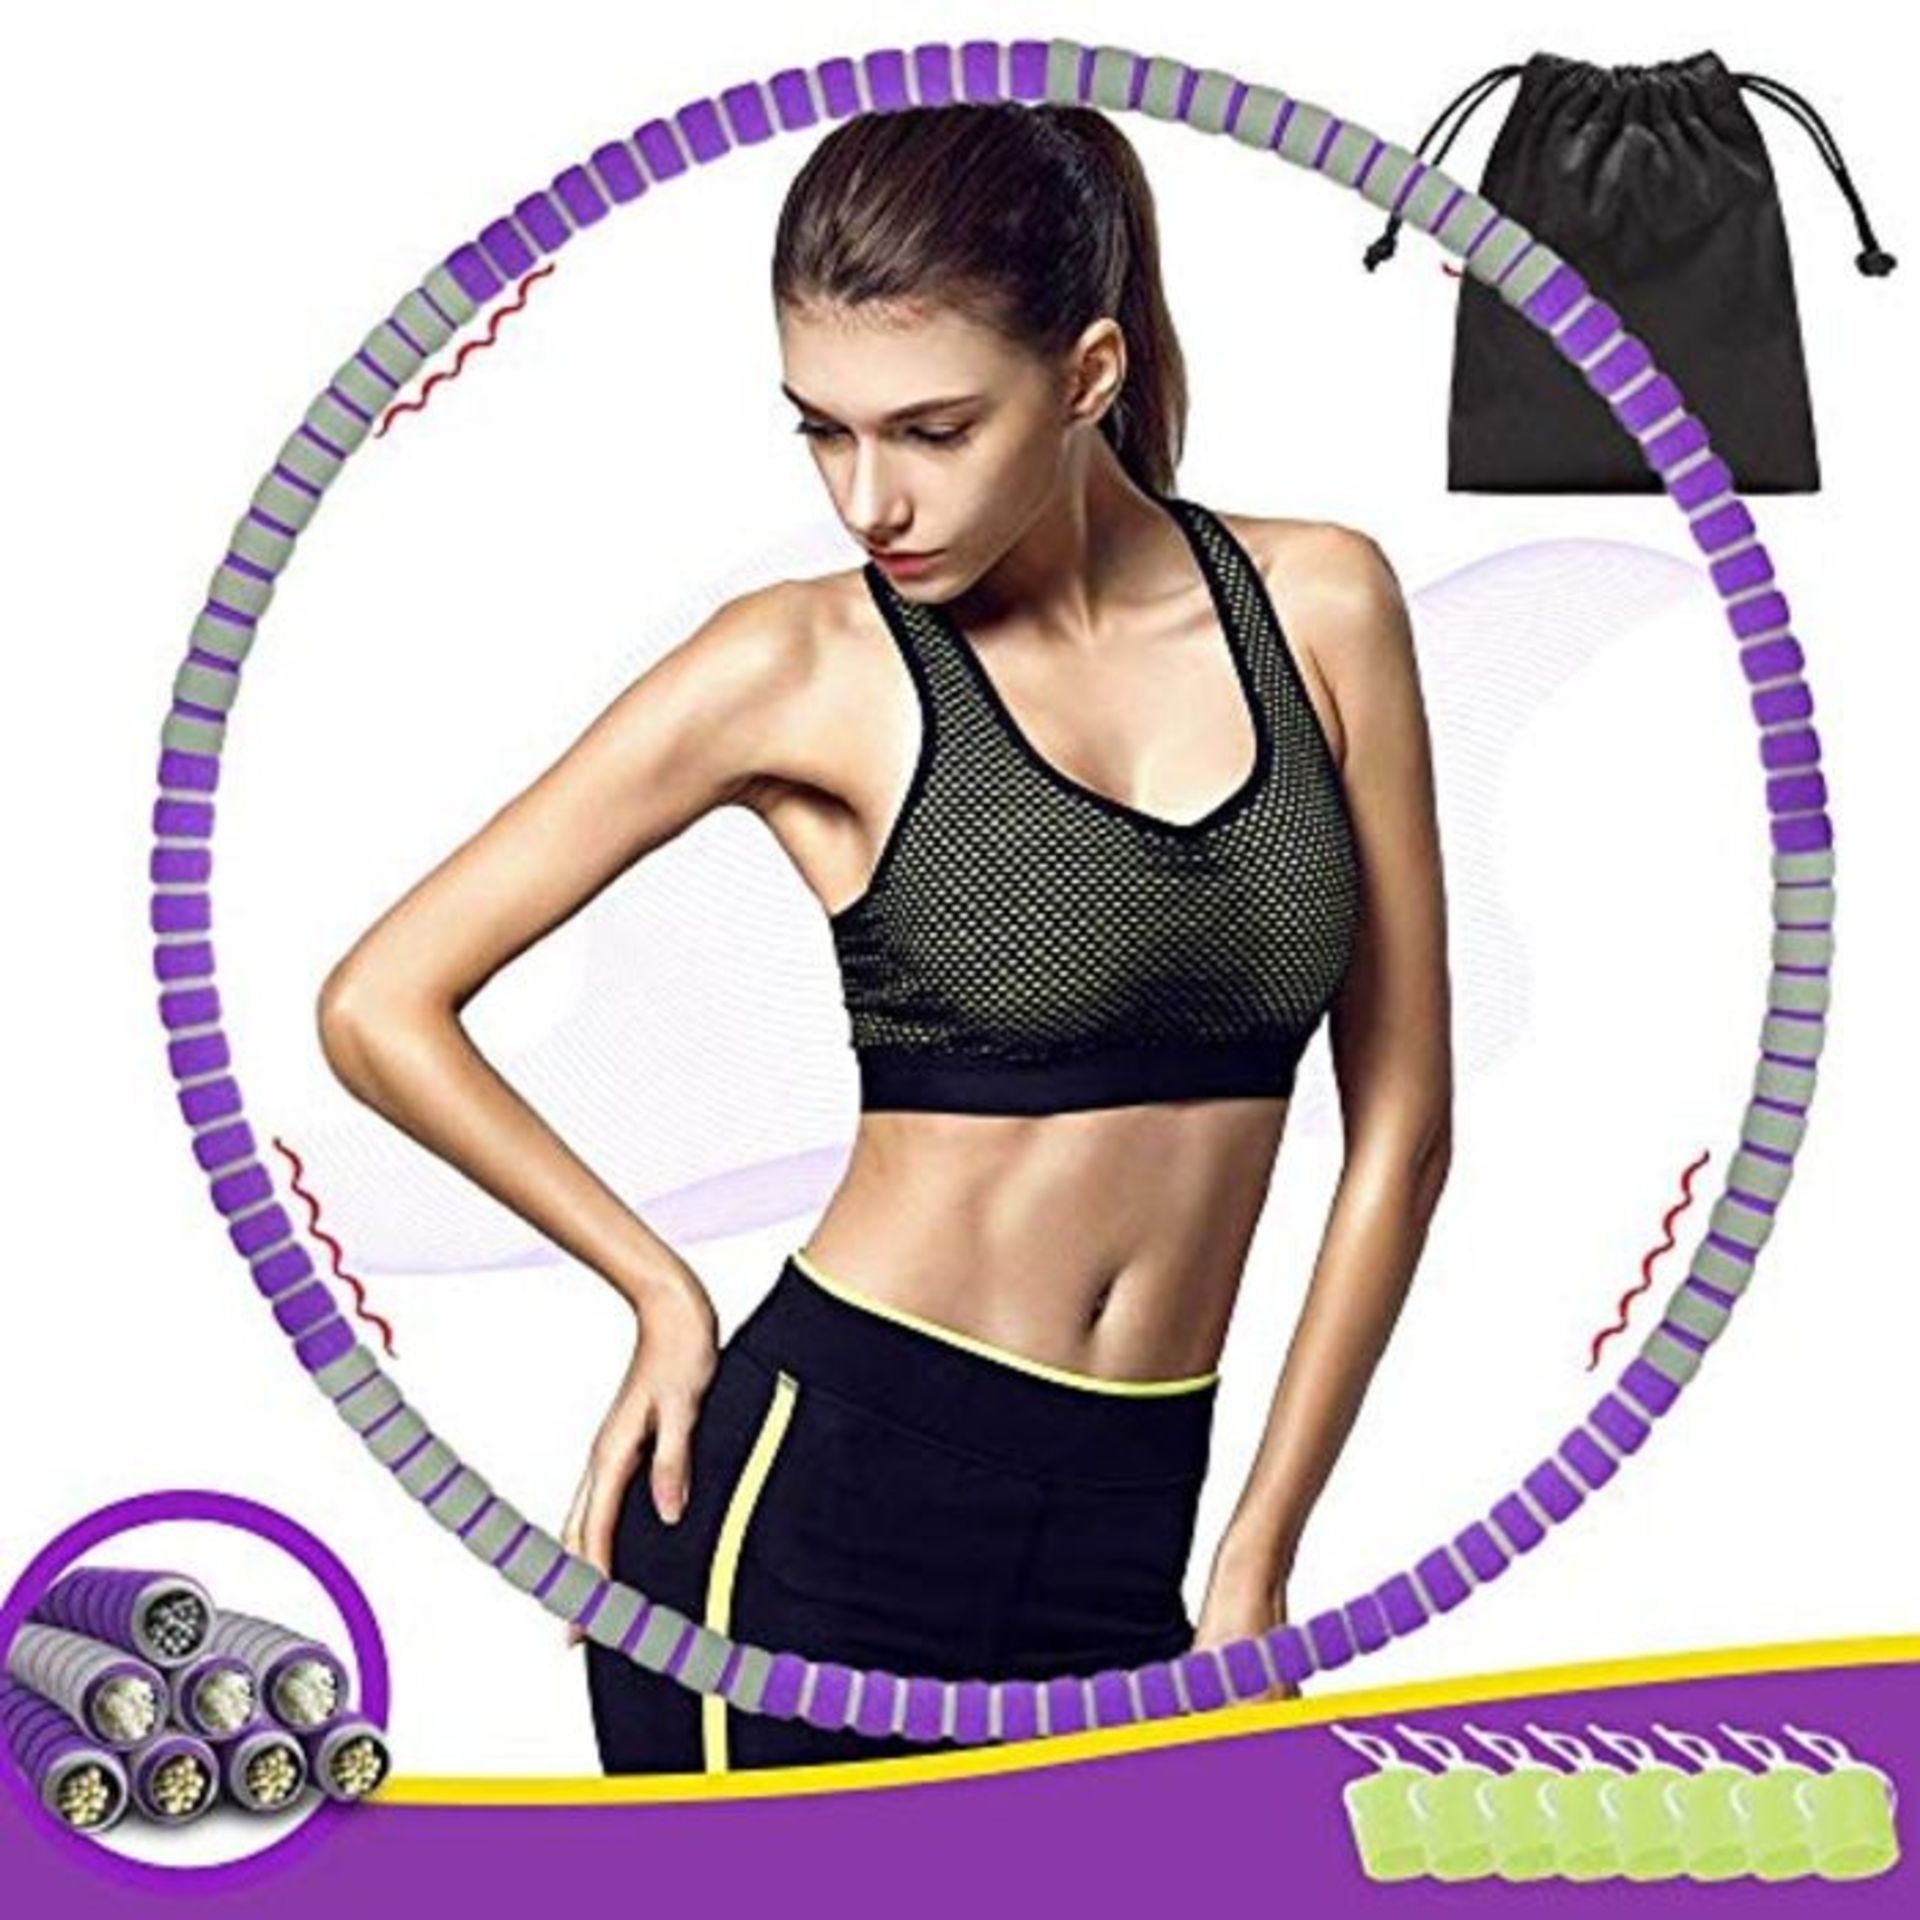 THOWALL Hula Hoop for Adults, 92CM 8-Section Weighted Hula Hoop for Exercise Fitness W